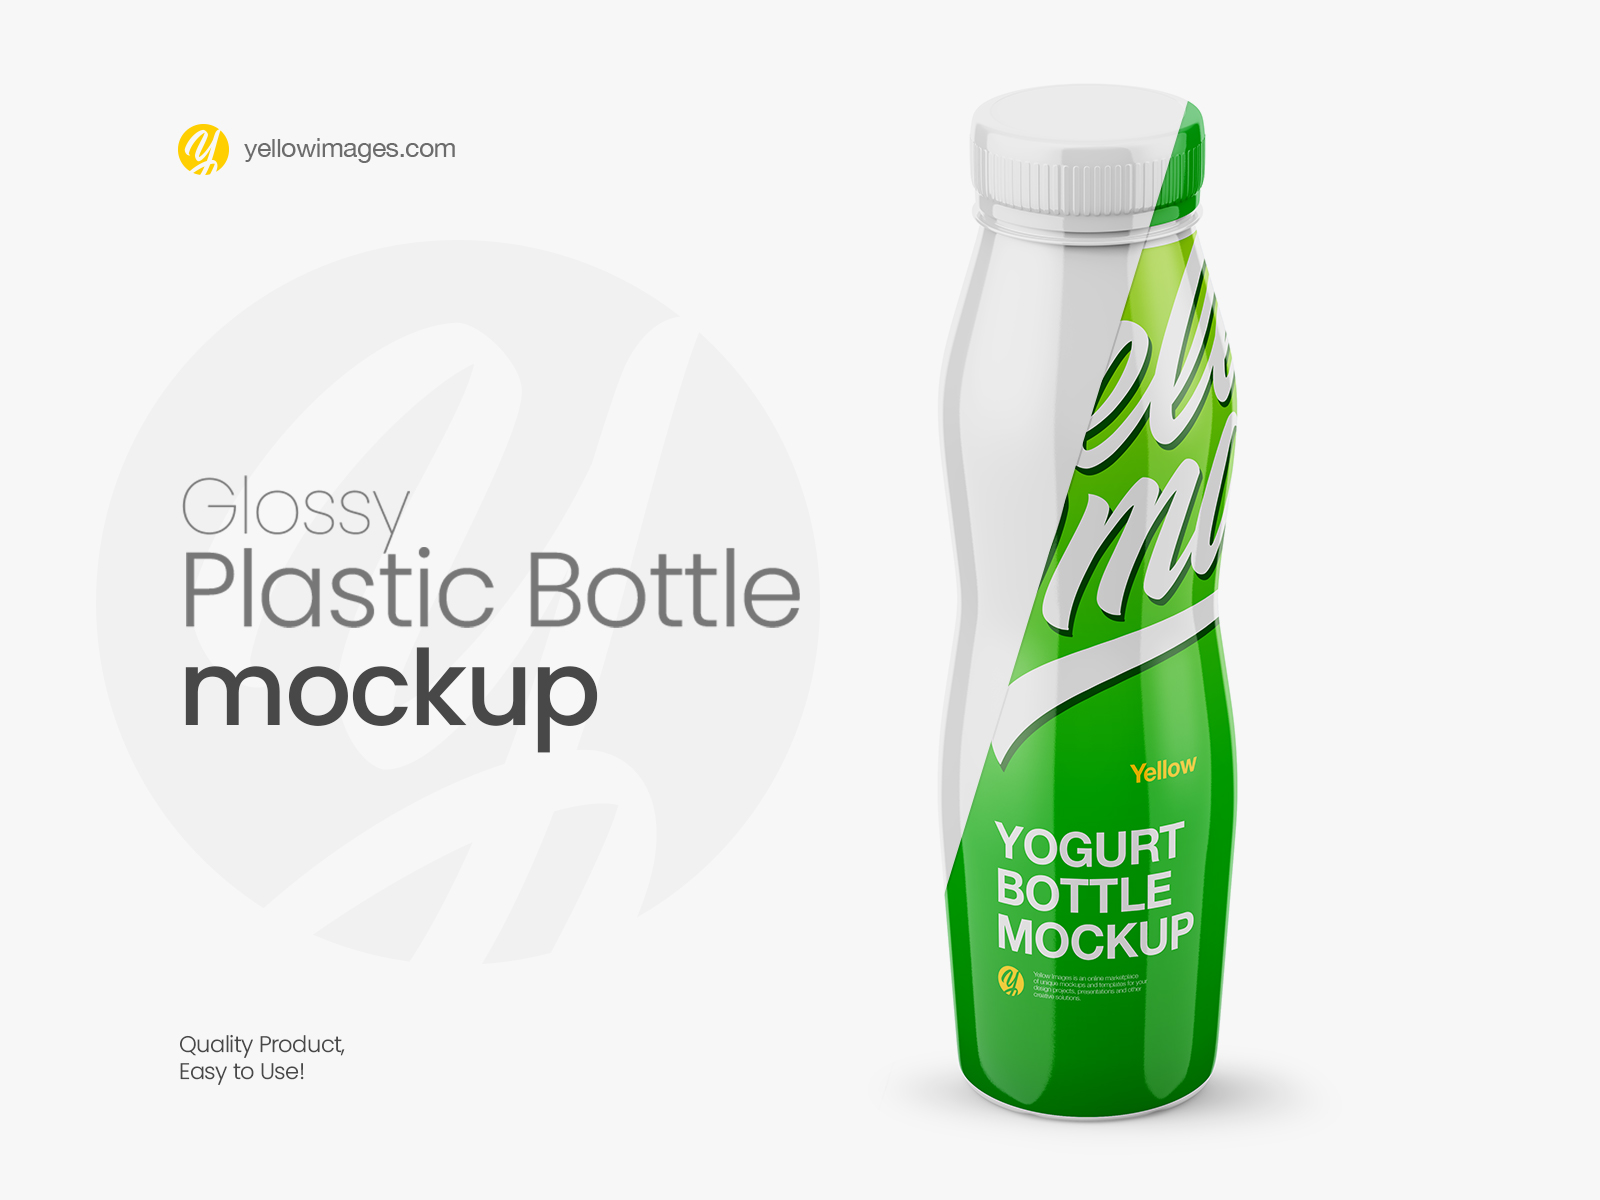 Download Plastic Milk Bottle Mockup Download Free And Premium Psd Mockup Templates And Design Assets Yellowimages Mockups